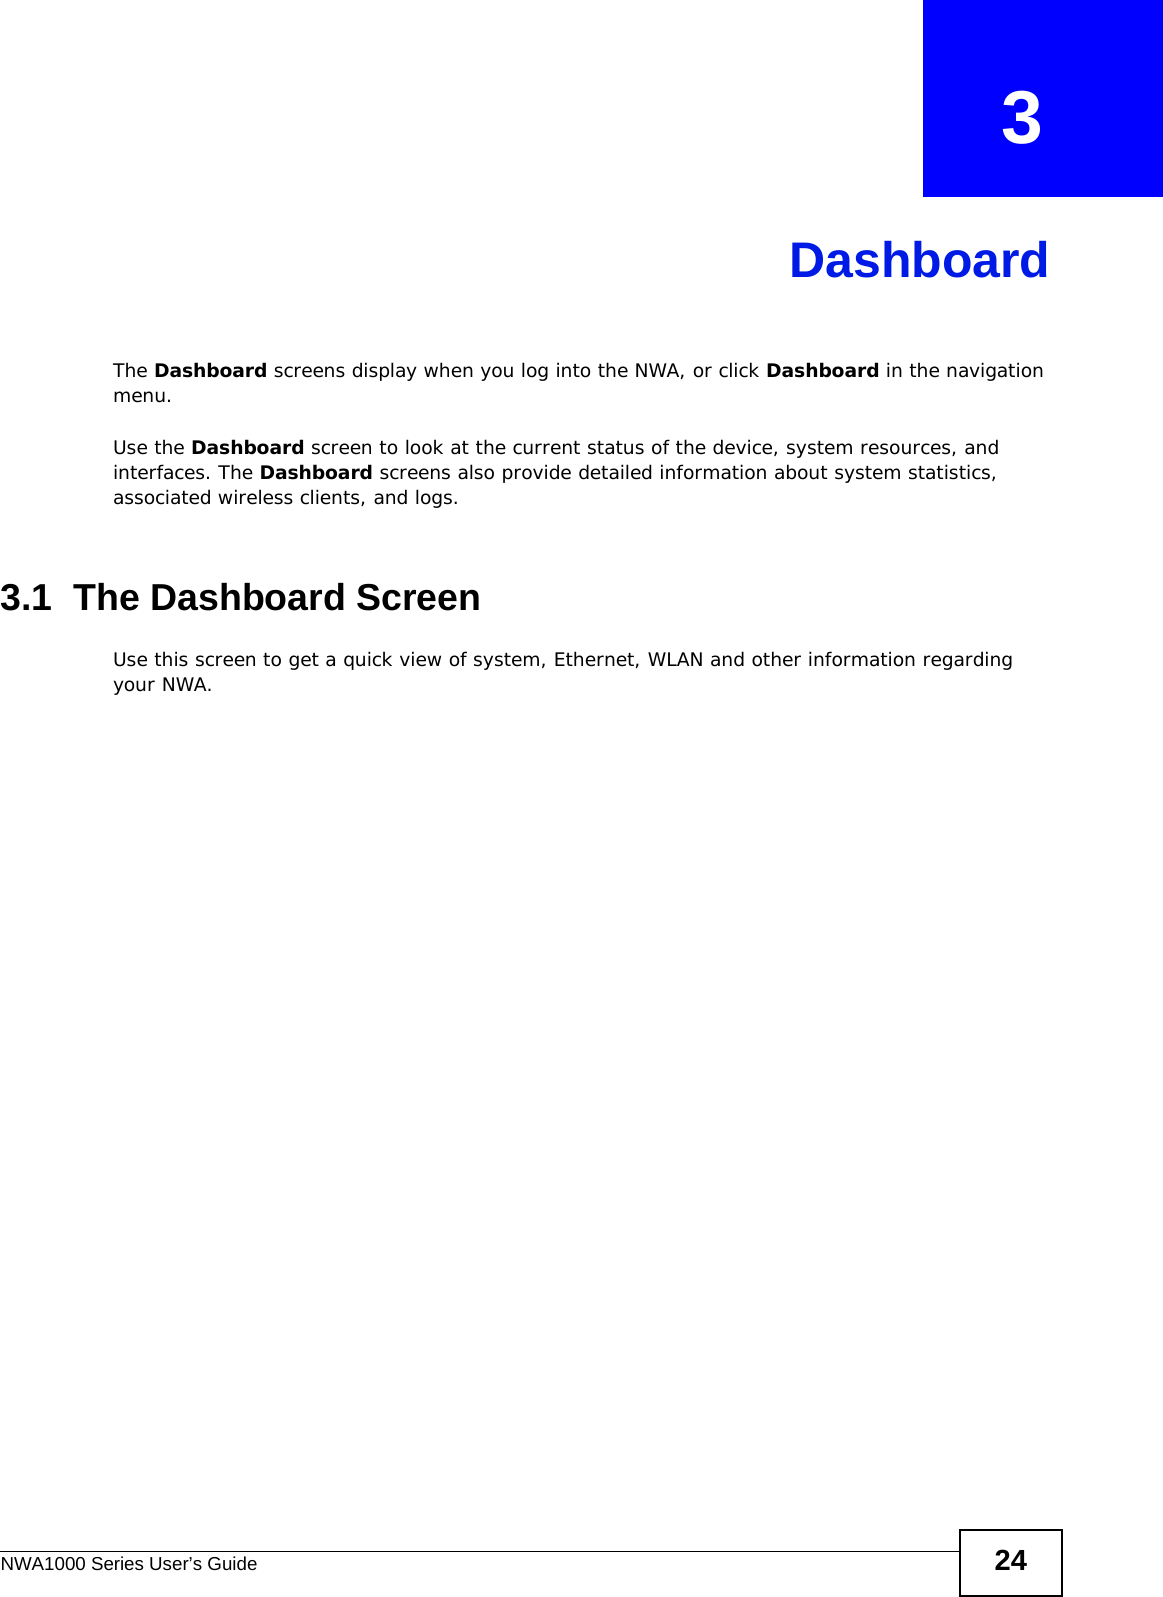 NWA1000 Series User’s Guide 24CHAPTER   3DashboardThe Dashboard screens display when you log into the NWA, or click Dashboard in the navigation menu.Use the Dashboard screen to look at the current status of the device, system resources, and interfaces. The Dashboard screens also provide detailed information about system statistics, associated wireless clients, and logs.3.1  The Dashboard ScreenUse this screen to get a quick view of system, Ethernet, WLAN and other information regarding your NWA. 